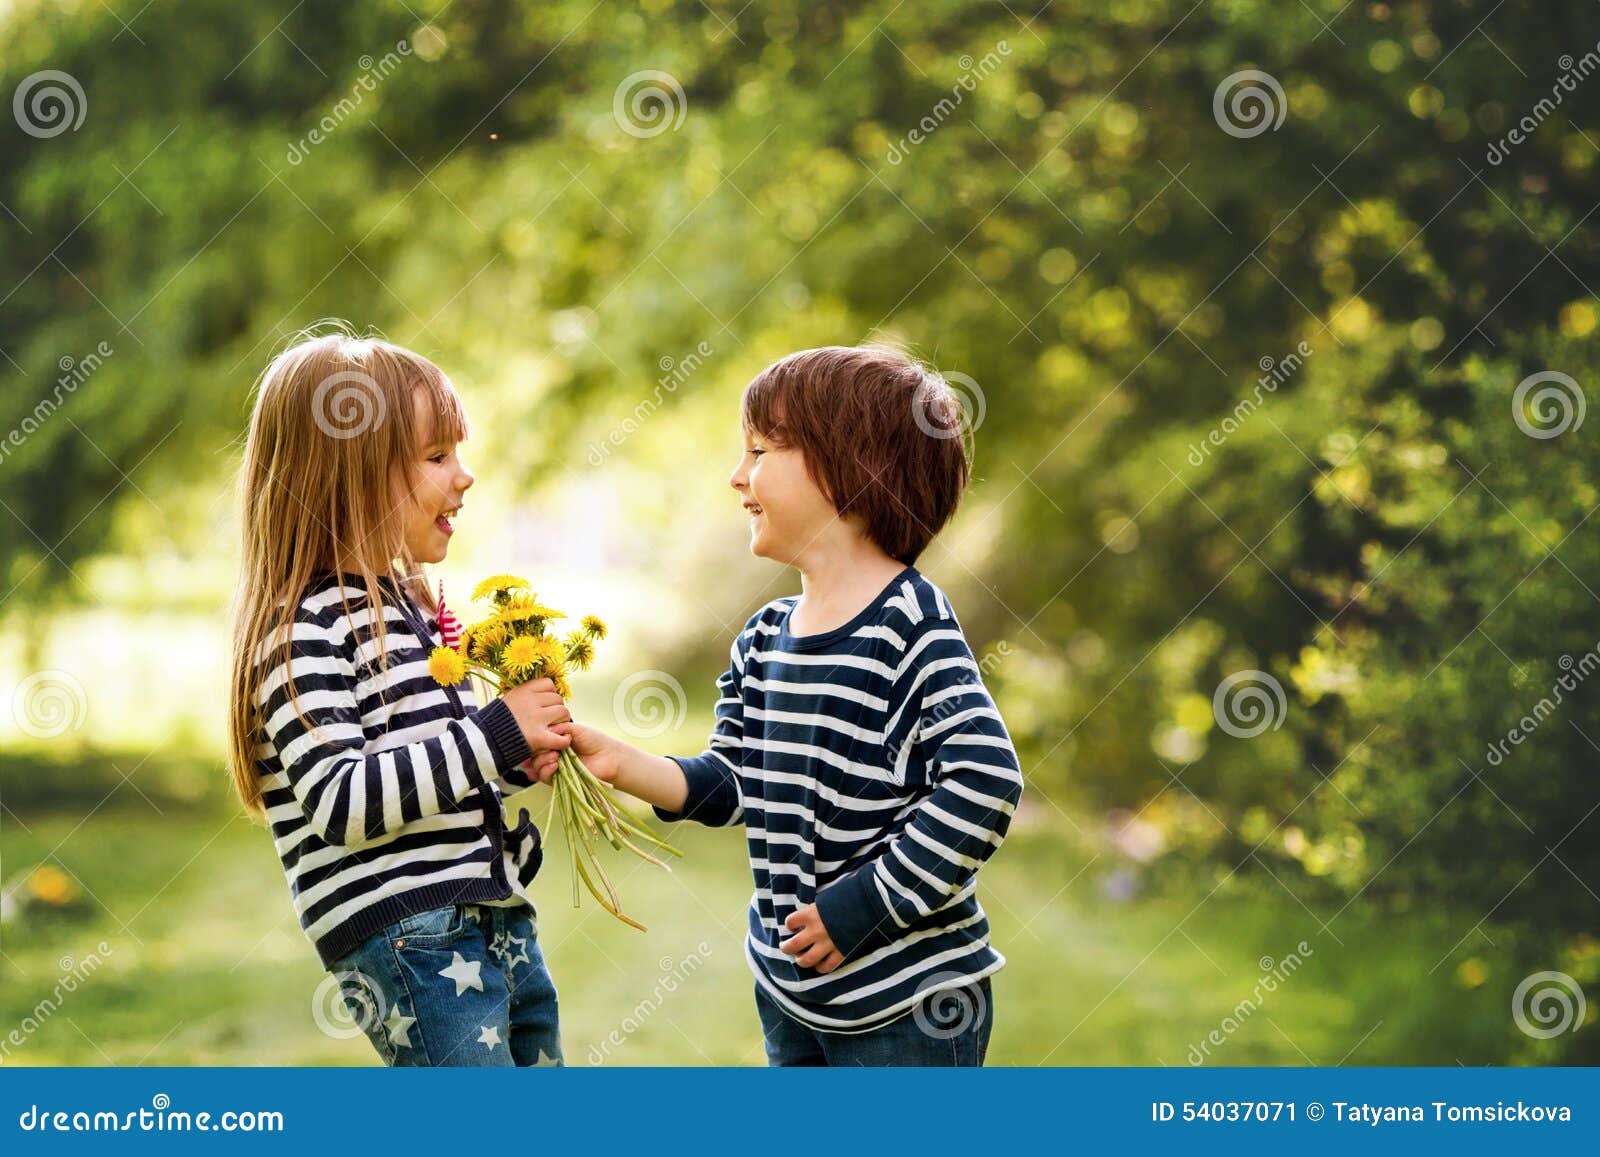  Beautiful  Boy  And Girl  In A Park Boy  Giving Flowers To 